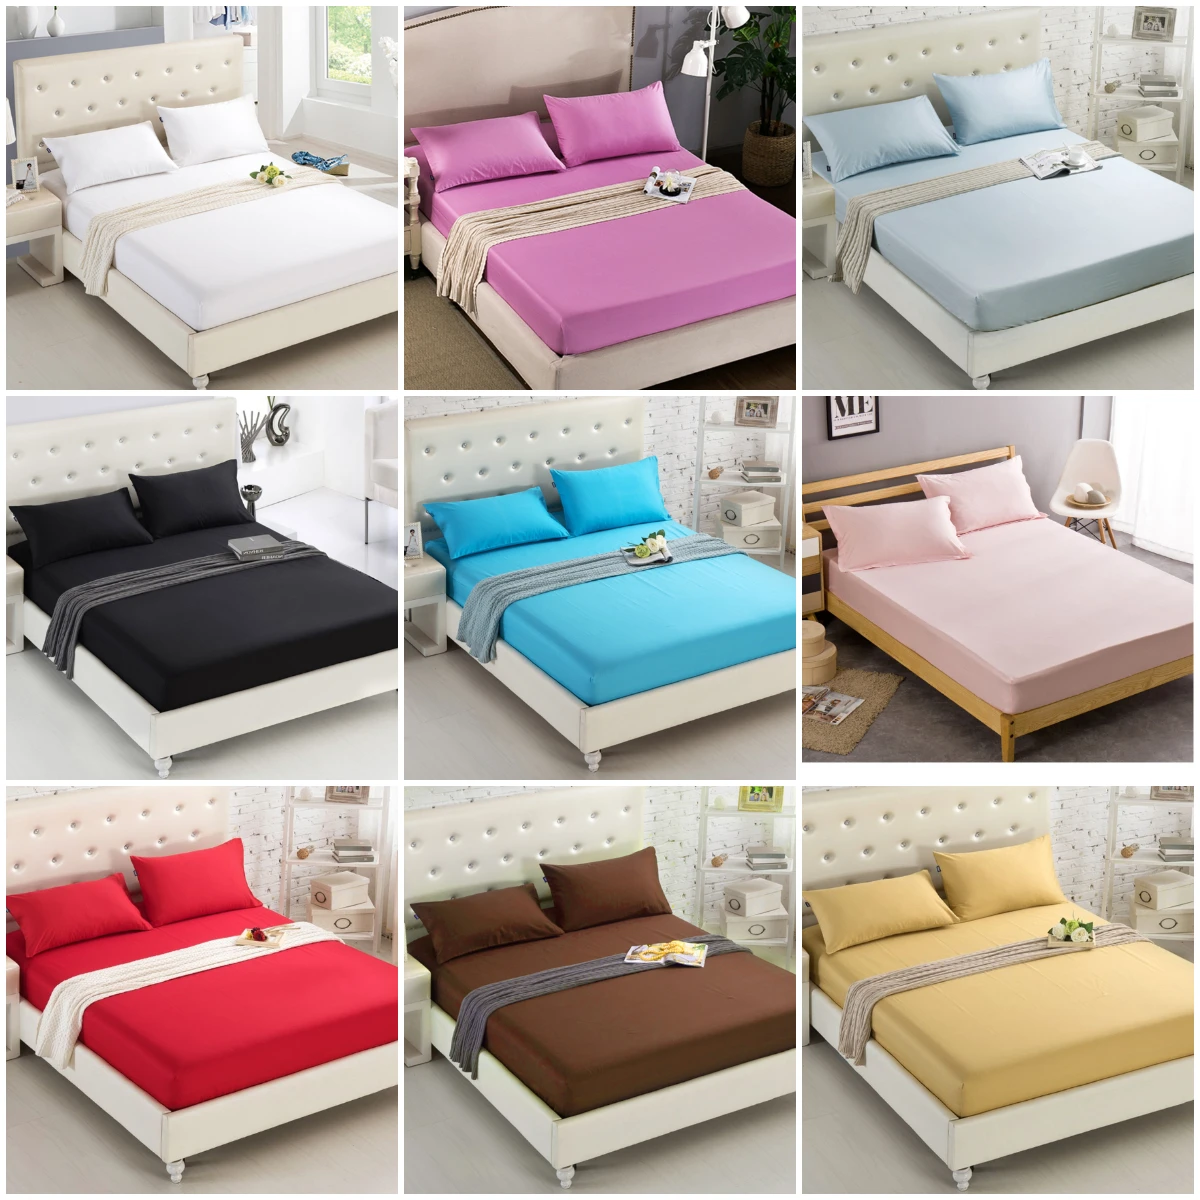 King Plain Dyed 100% Cotton Fitted Bed Sheets In Multi Colors Single Double